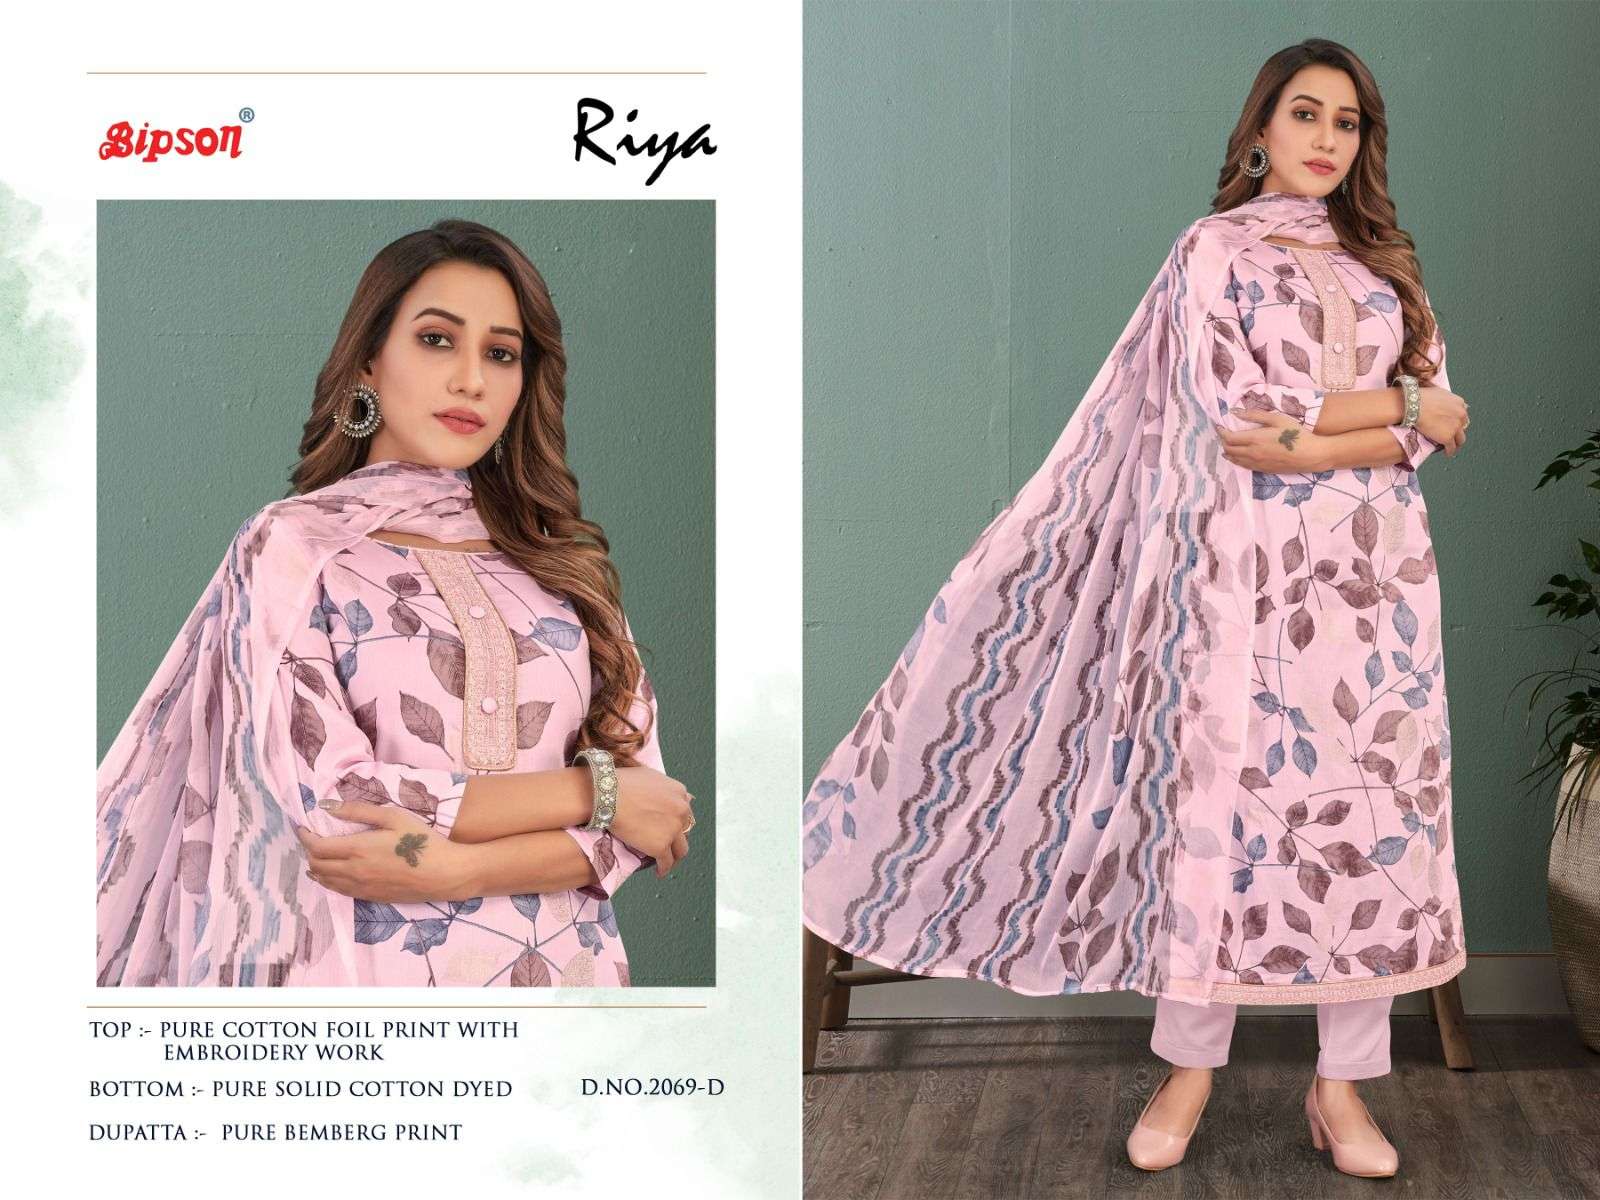 Bipson Riya 2069 Pure Cotton Foil Print With Embroidery Work Designer Dress Material On Wholesale